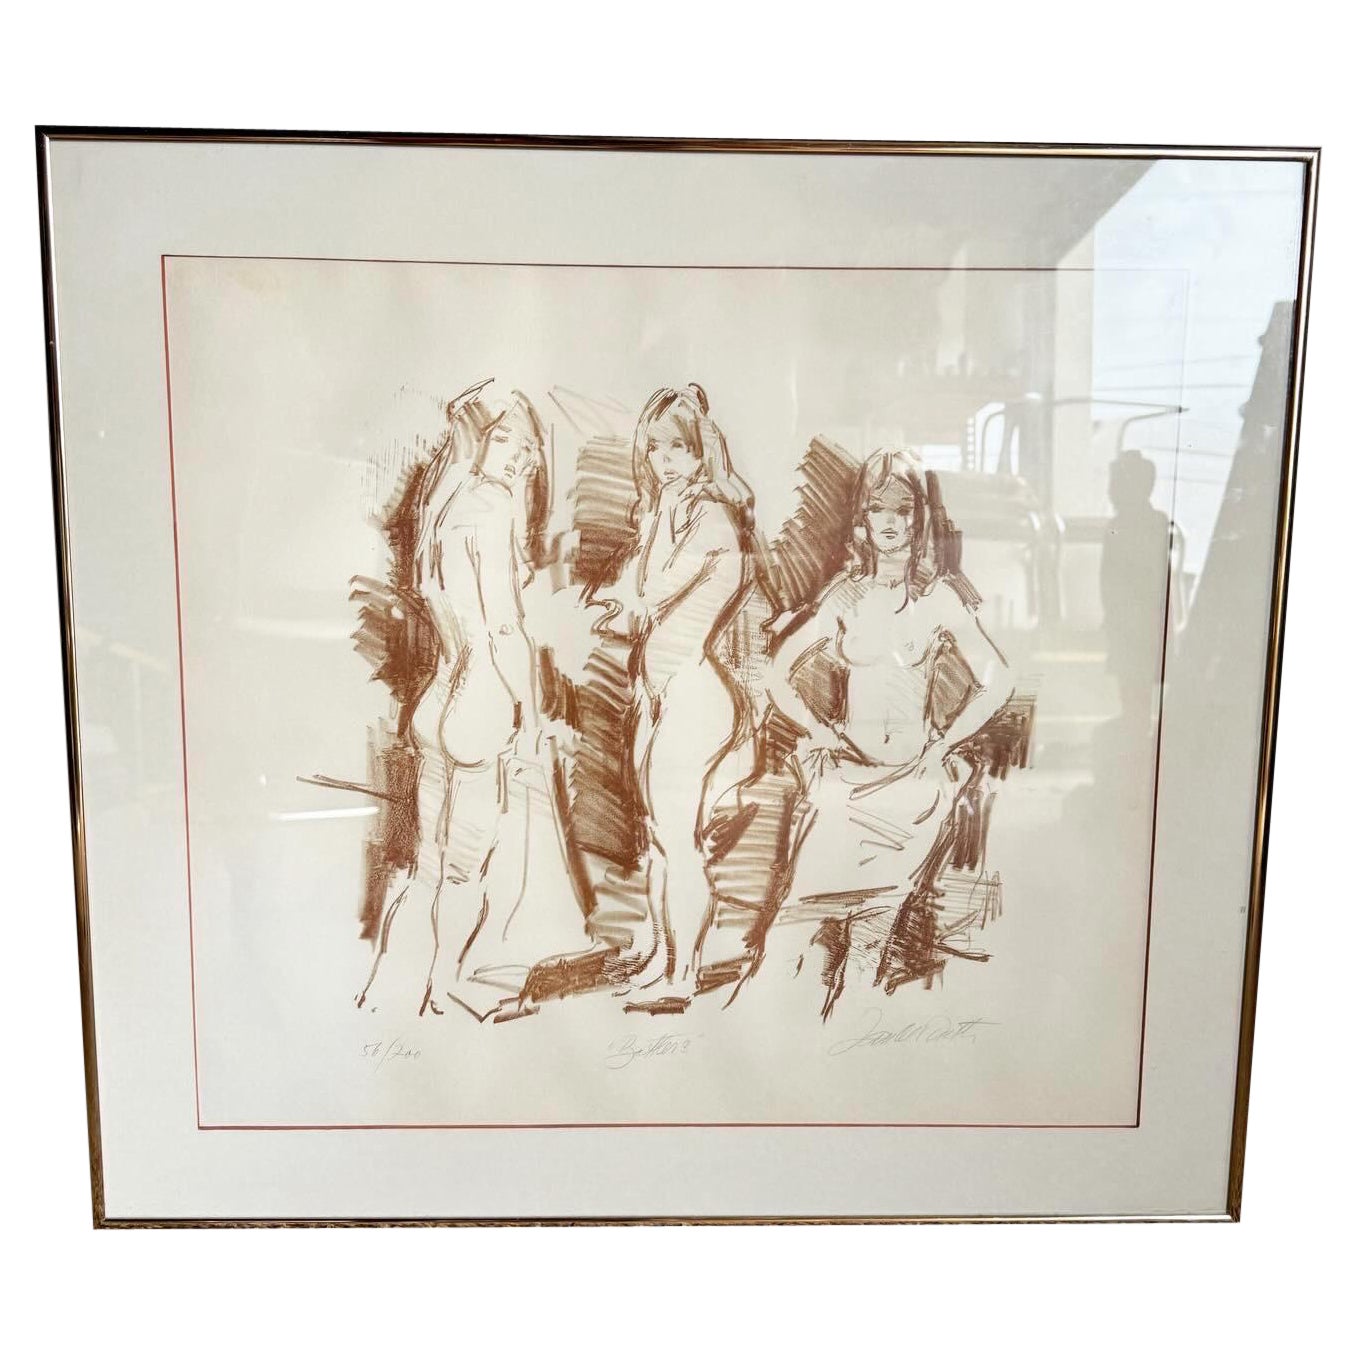 Signed and Numbered Lithograph "Bathers" by Jan De Ruth For Sale